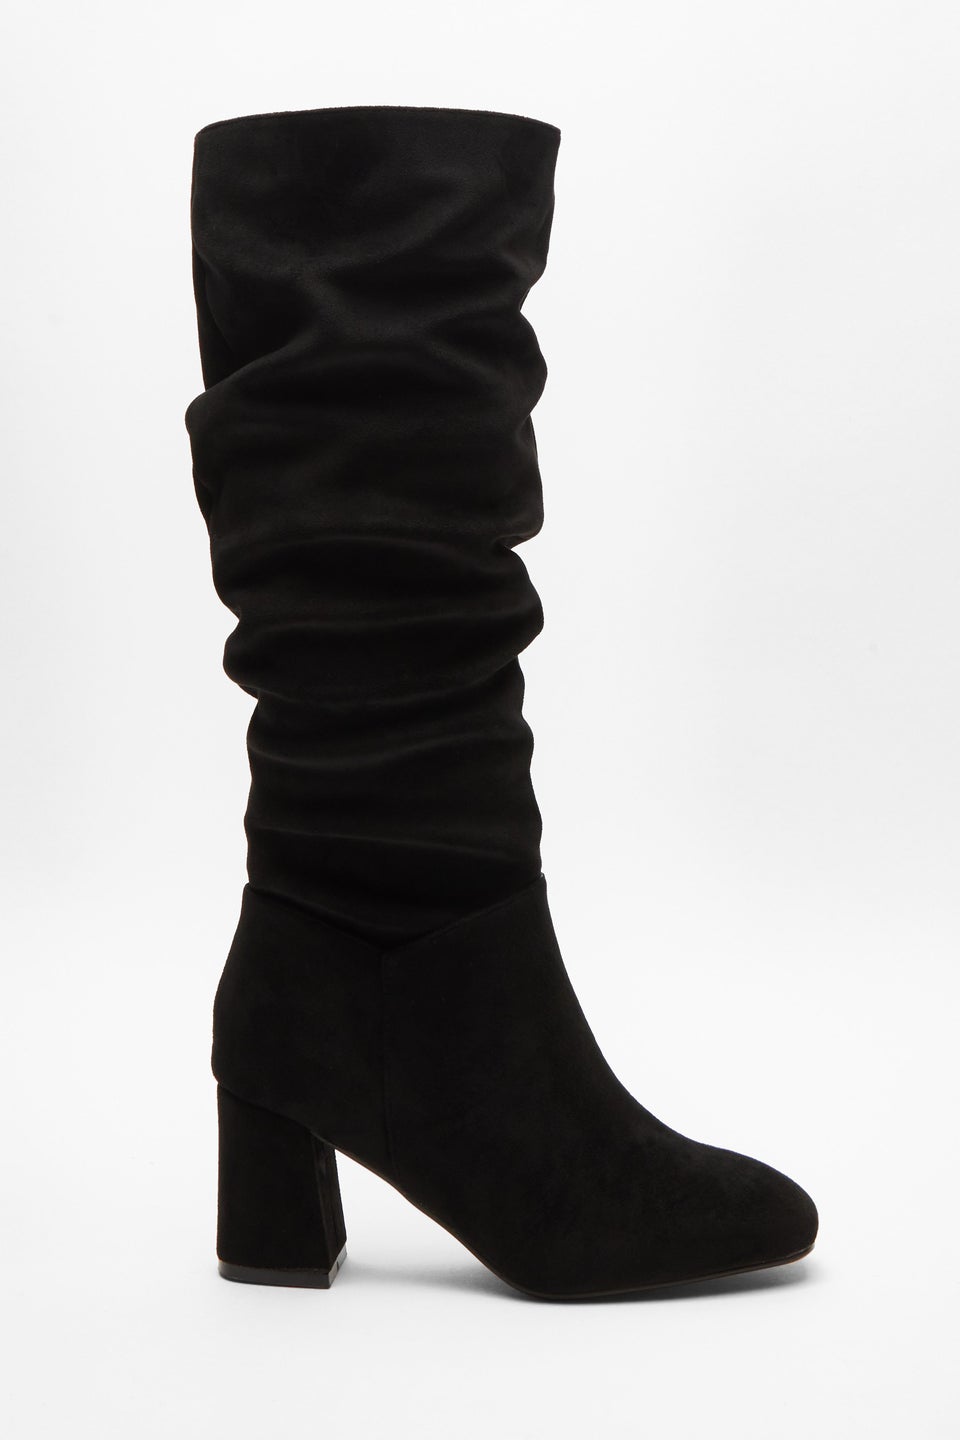 Quiz Black Faux Suede Ruched Heeled Boots